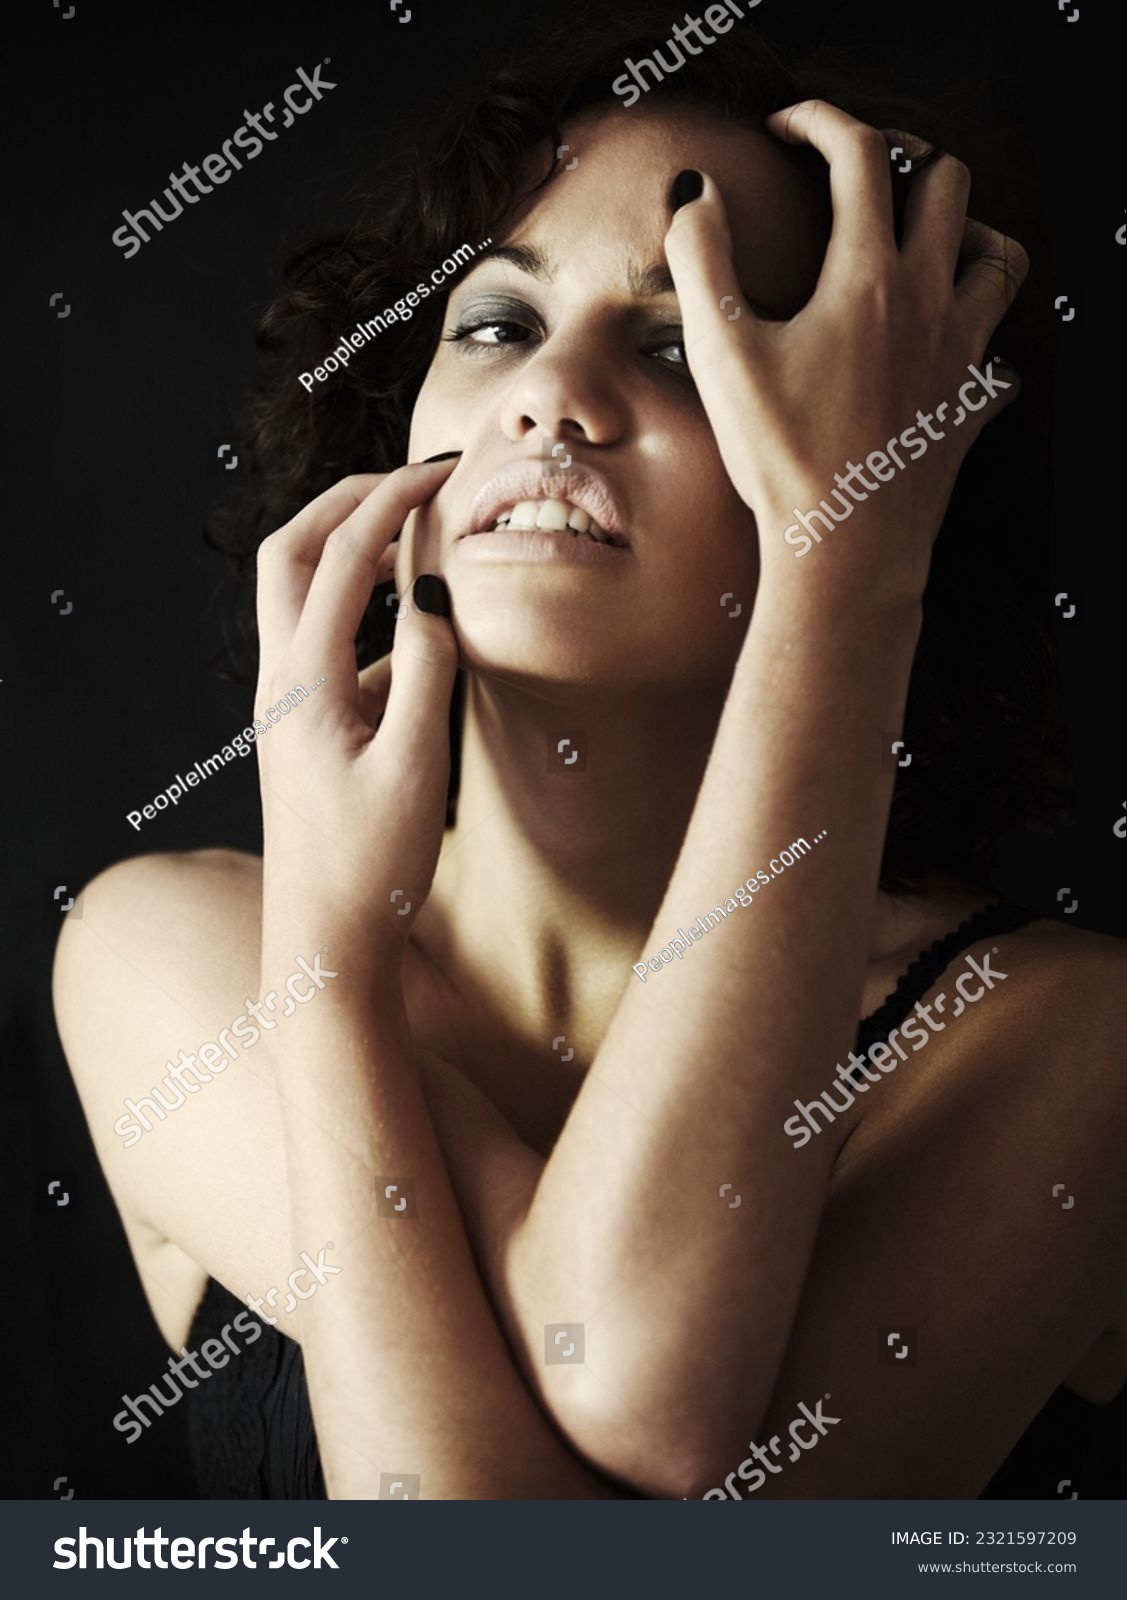 Portrait, depression and woman with anorexia in studio with bulimia, body dysmorphia and crisis on black background. Anxiety, psychology and face anorexic female person with eating disorder and shame #2321597209